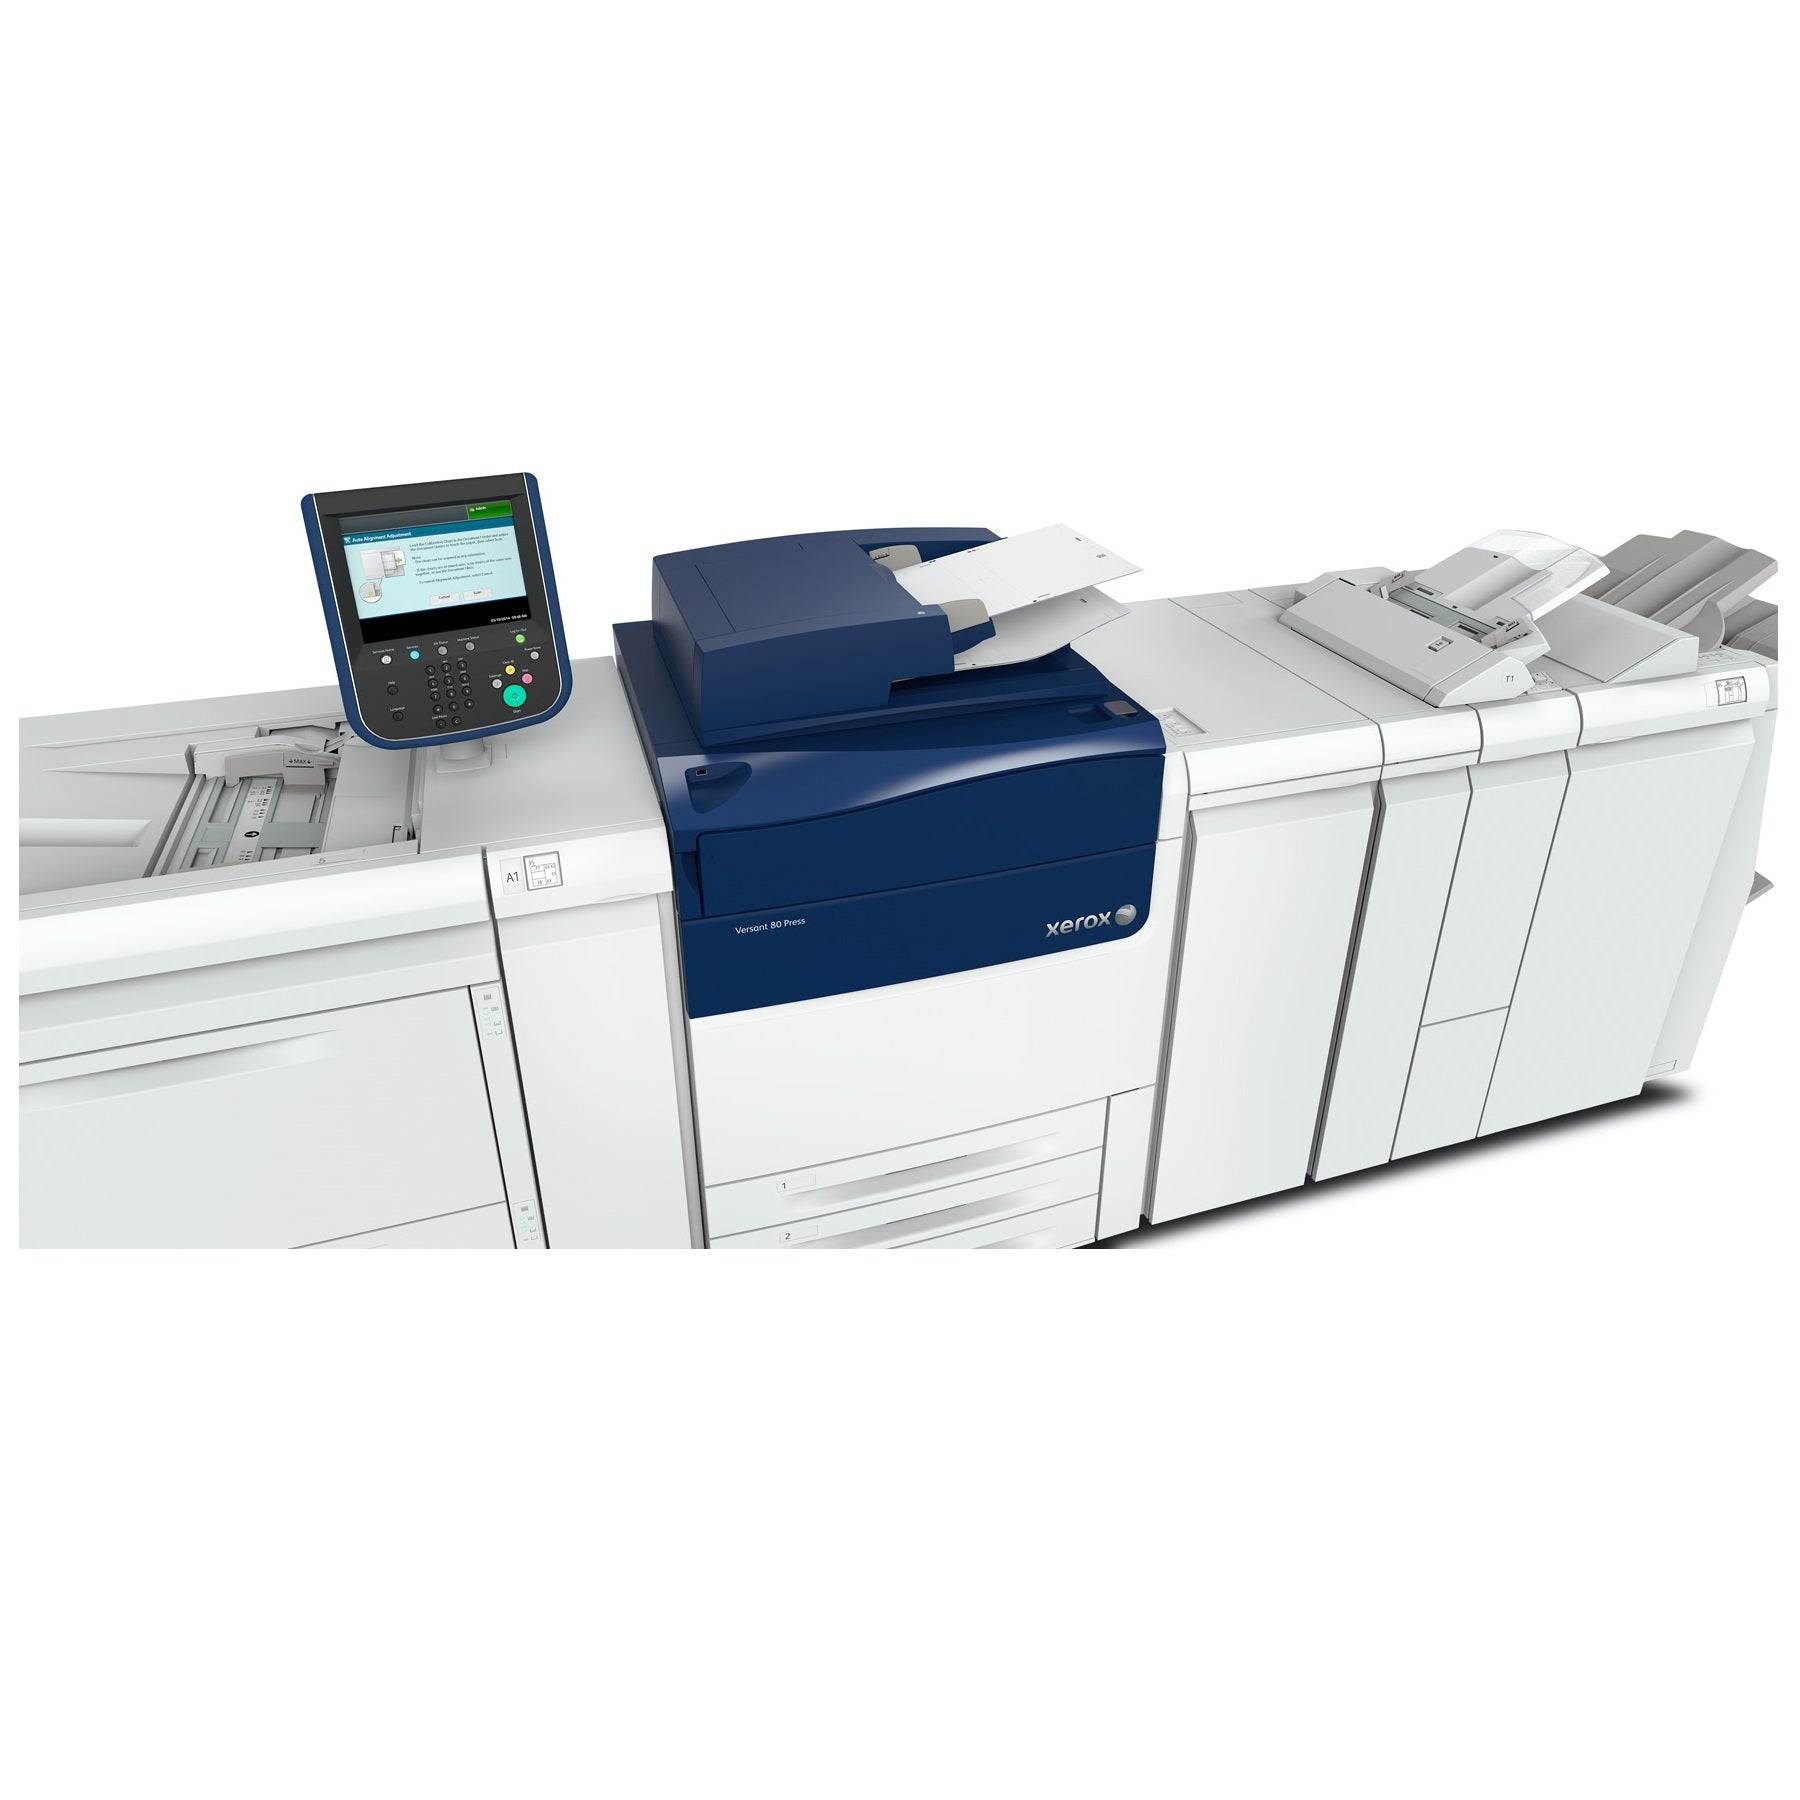 Xerox Versant 80 Press: A Comprehensive Review of Features, Benefits, and Pricing